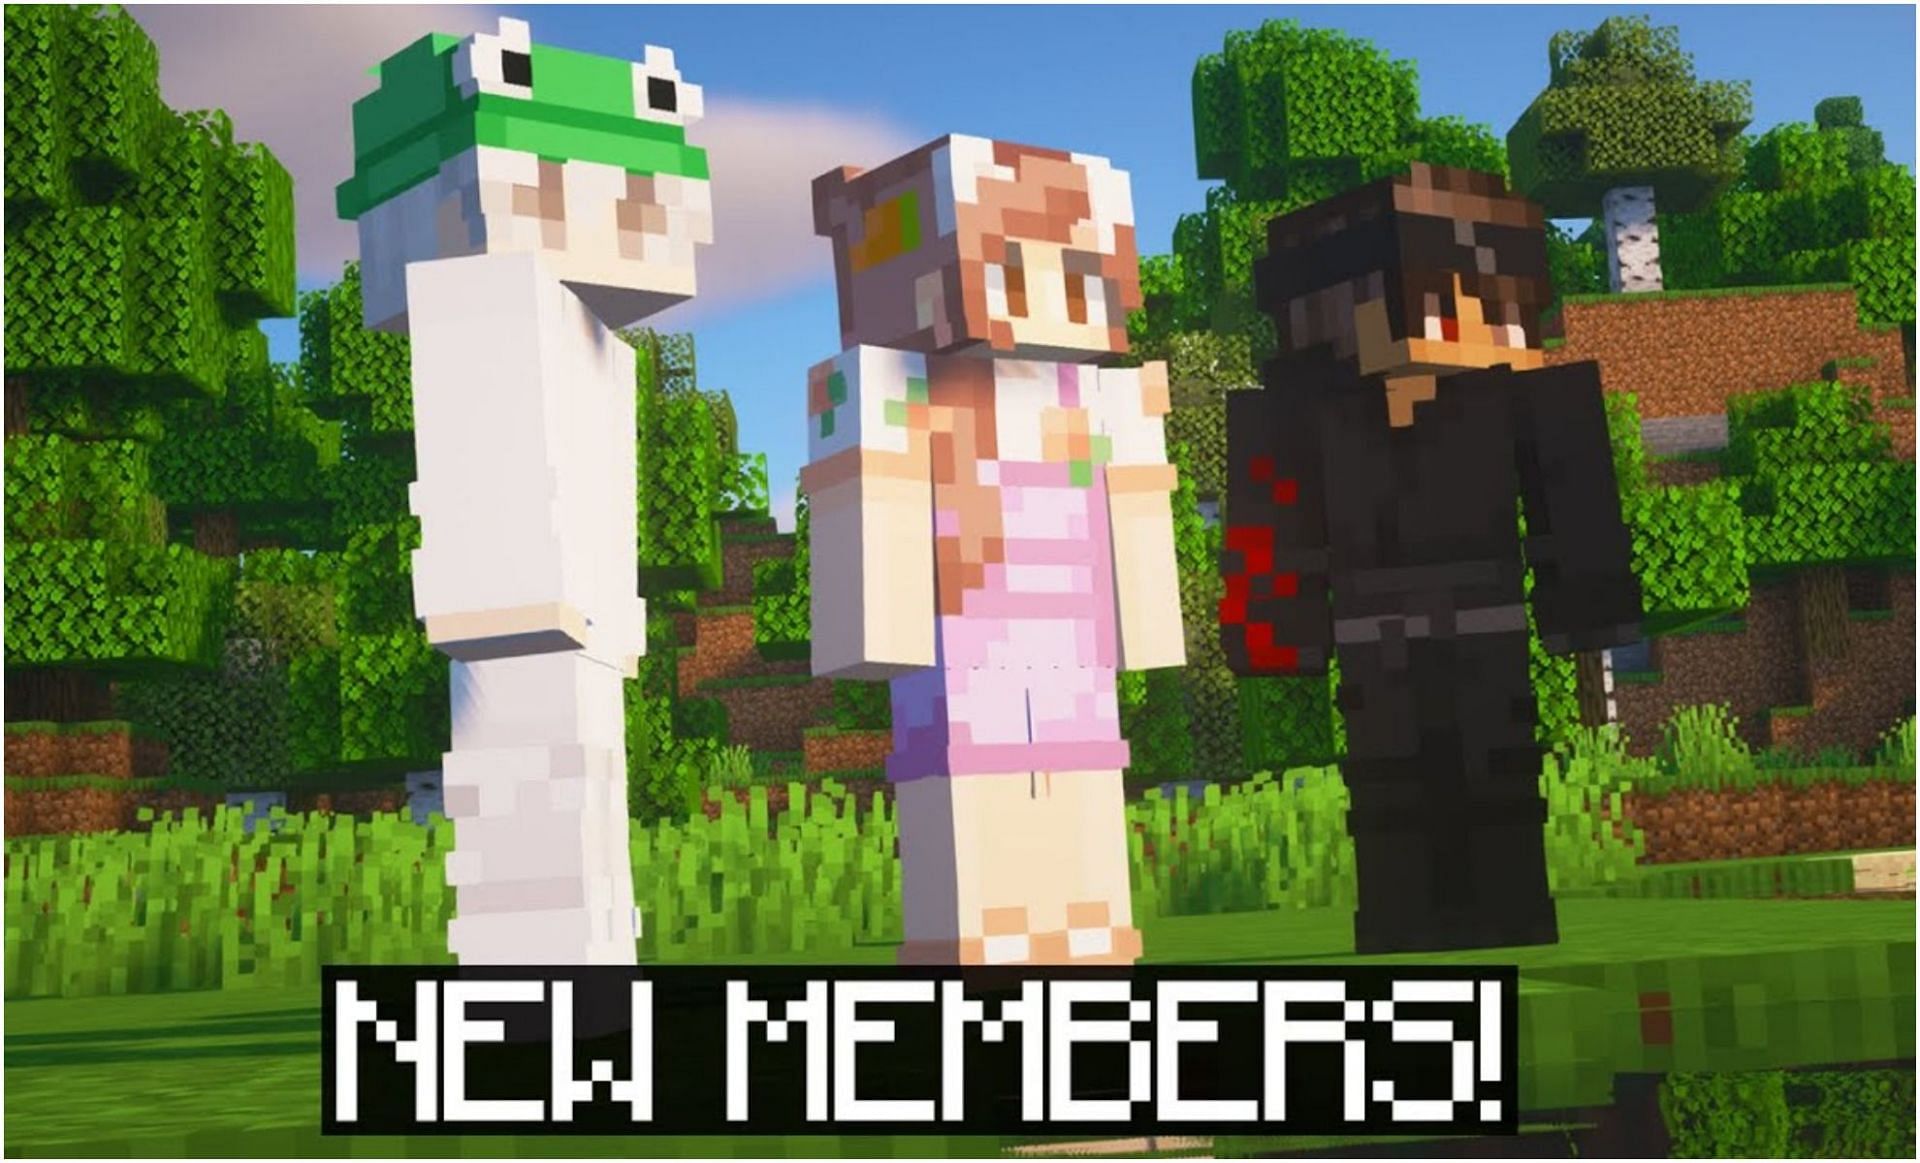 The Dream SMP can expect new members soon (Image via KianKSG on YouTube)